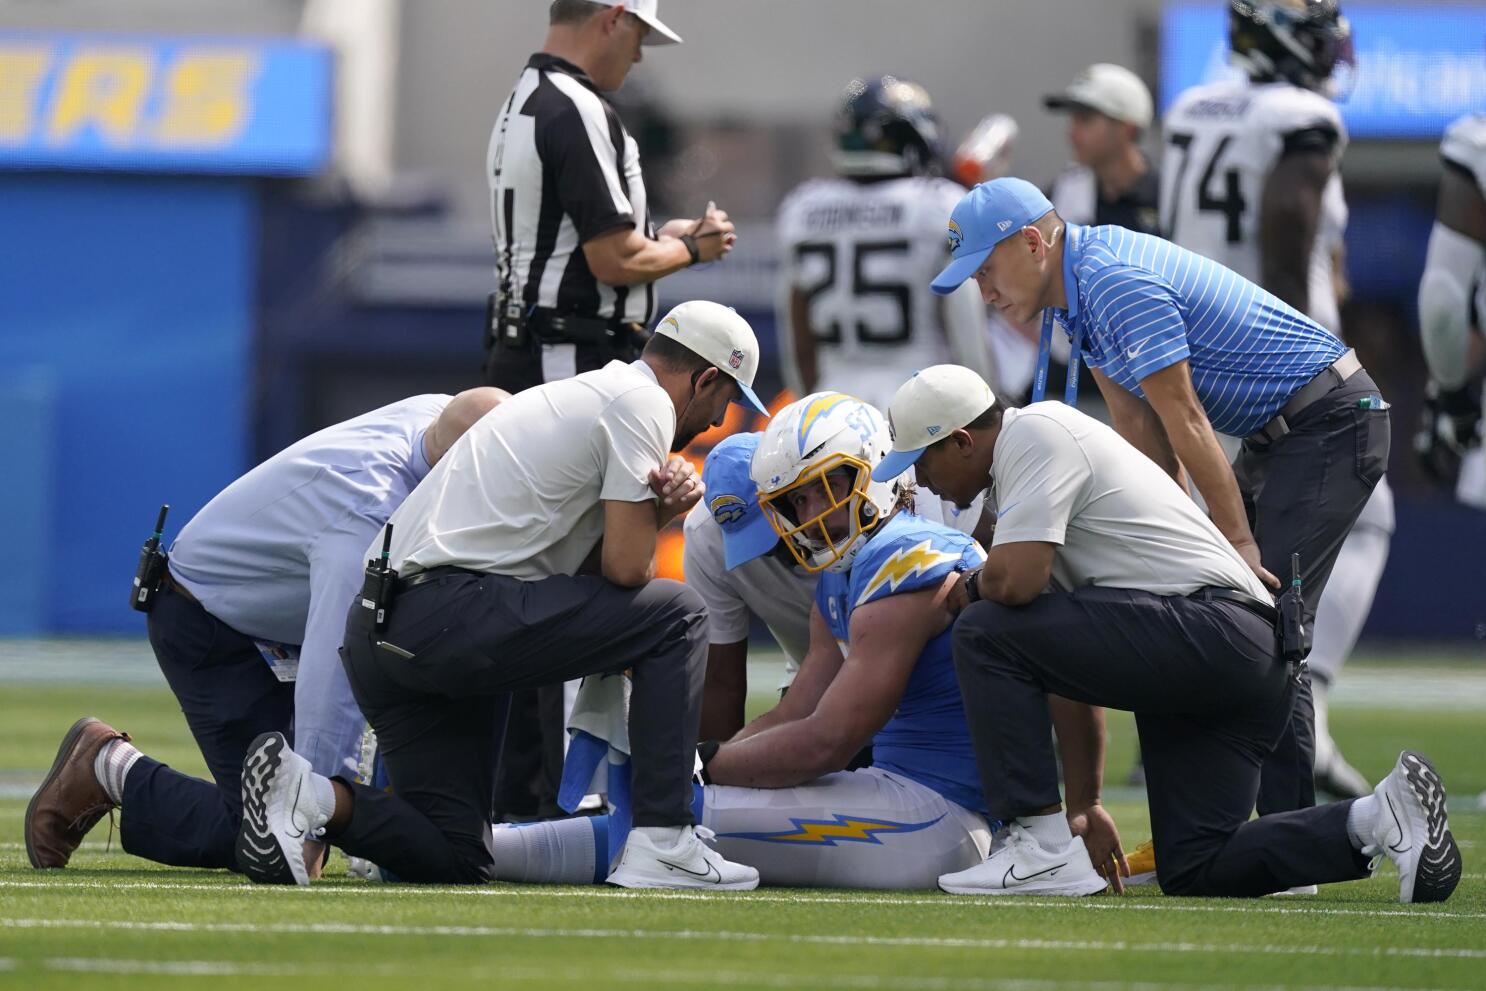 Los Angeles Chargers Activate Outside Linebacker Joey Bosa